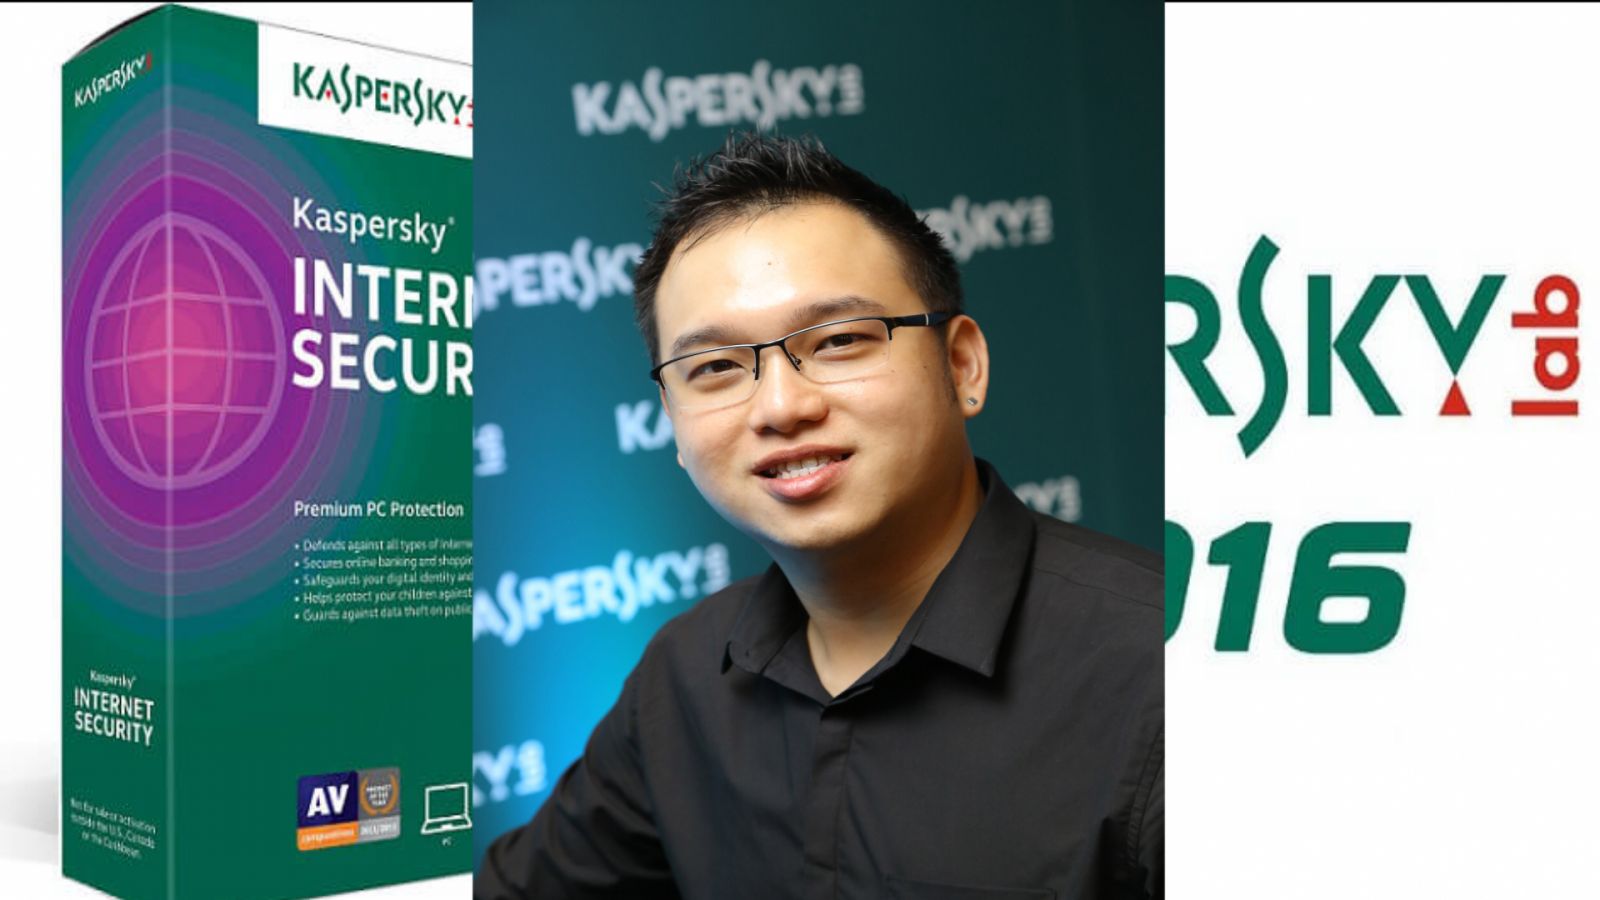 Kaspersky accuses Microsoft of monopoly abuse